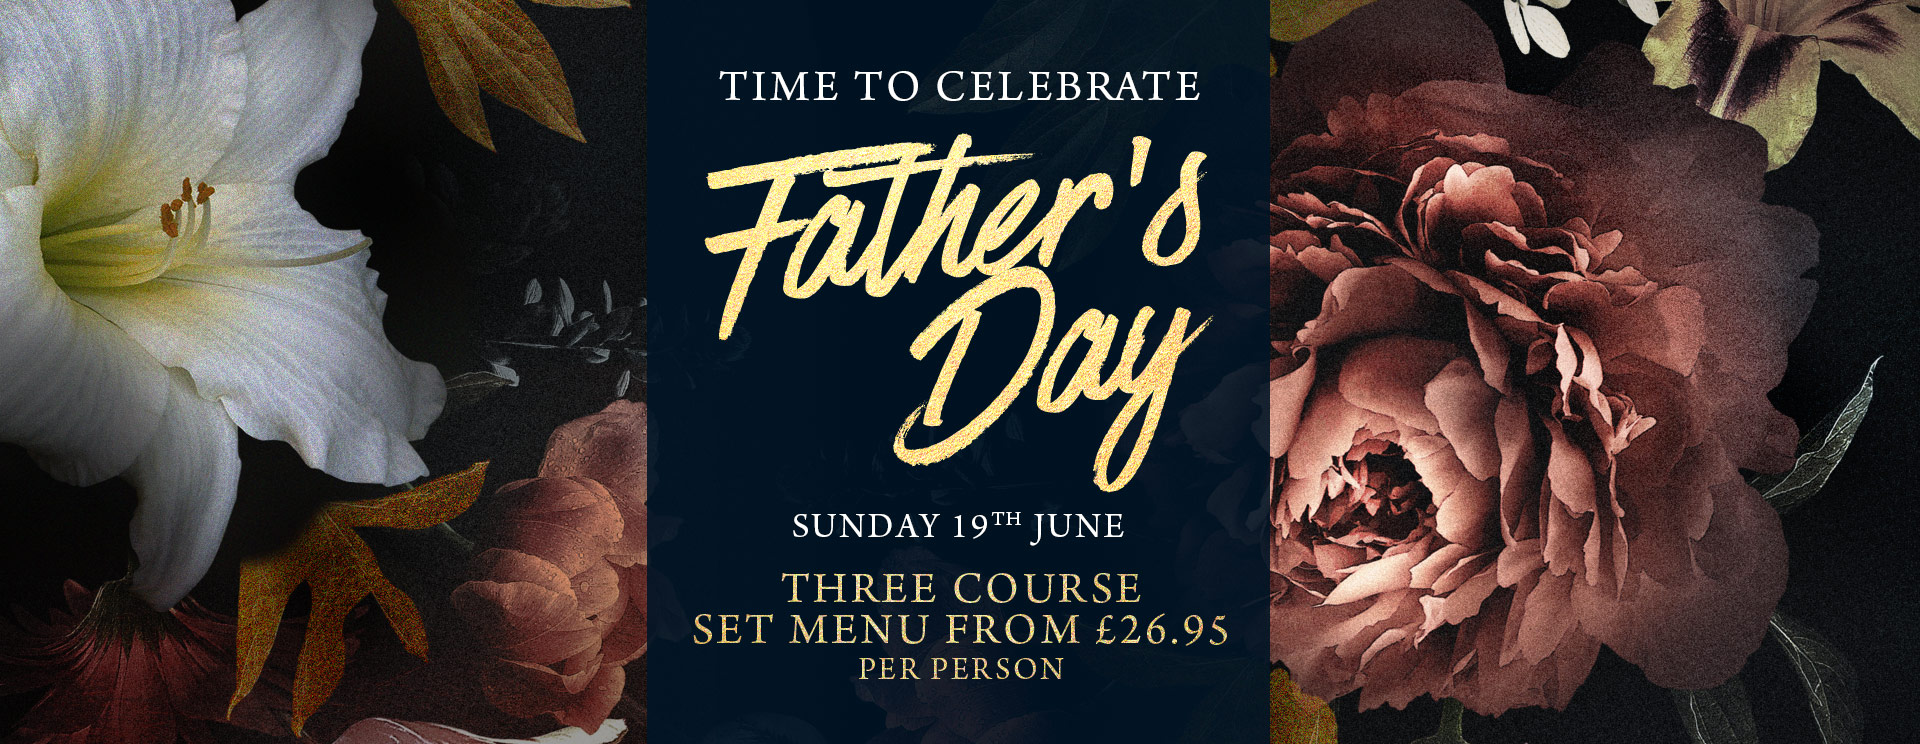 Fathers Day at The Plough